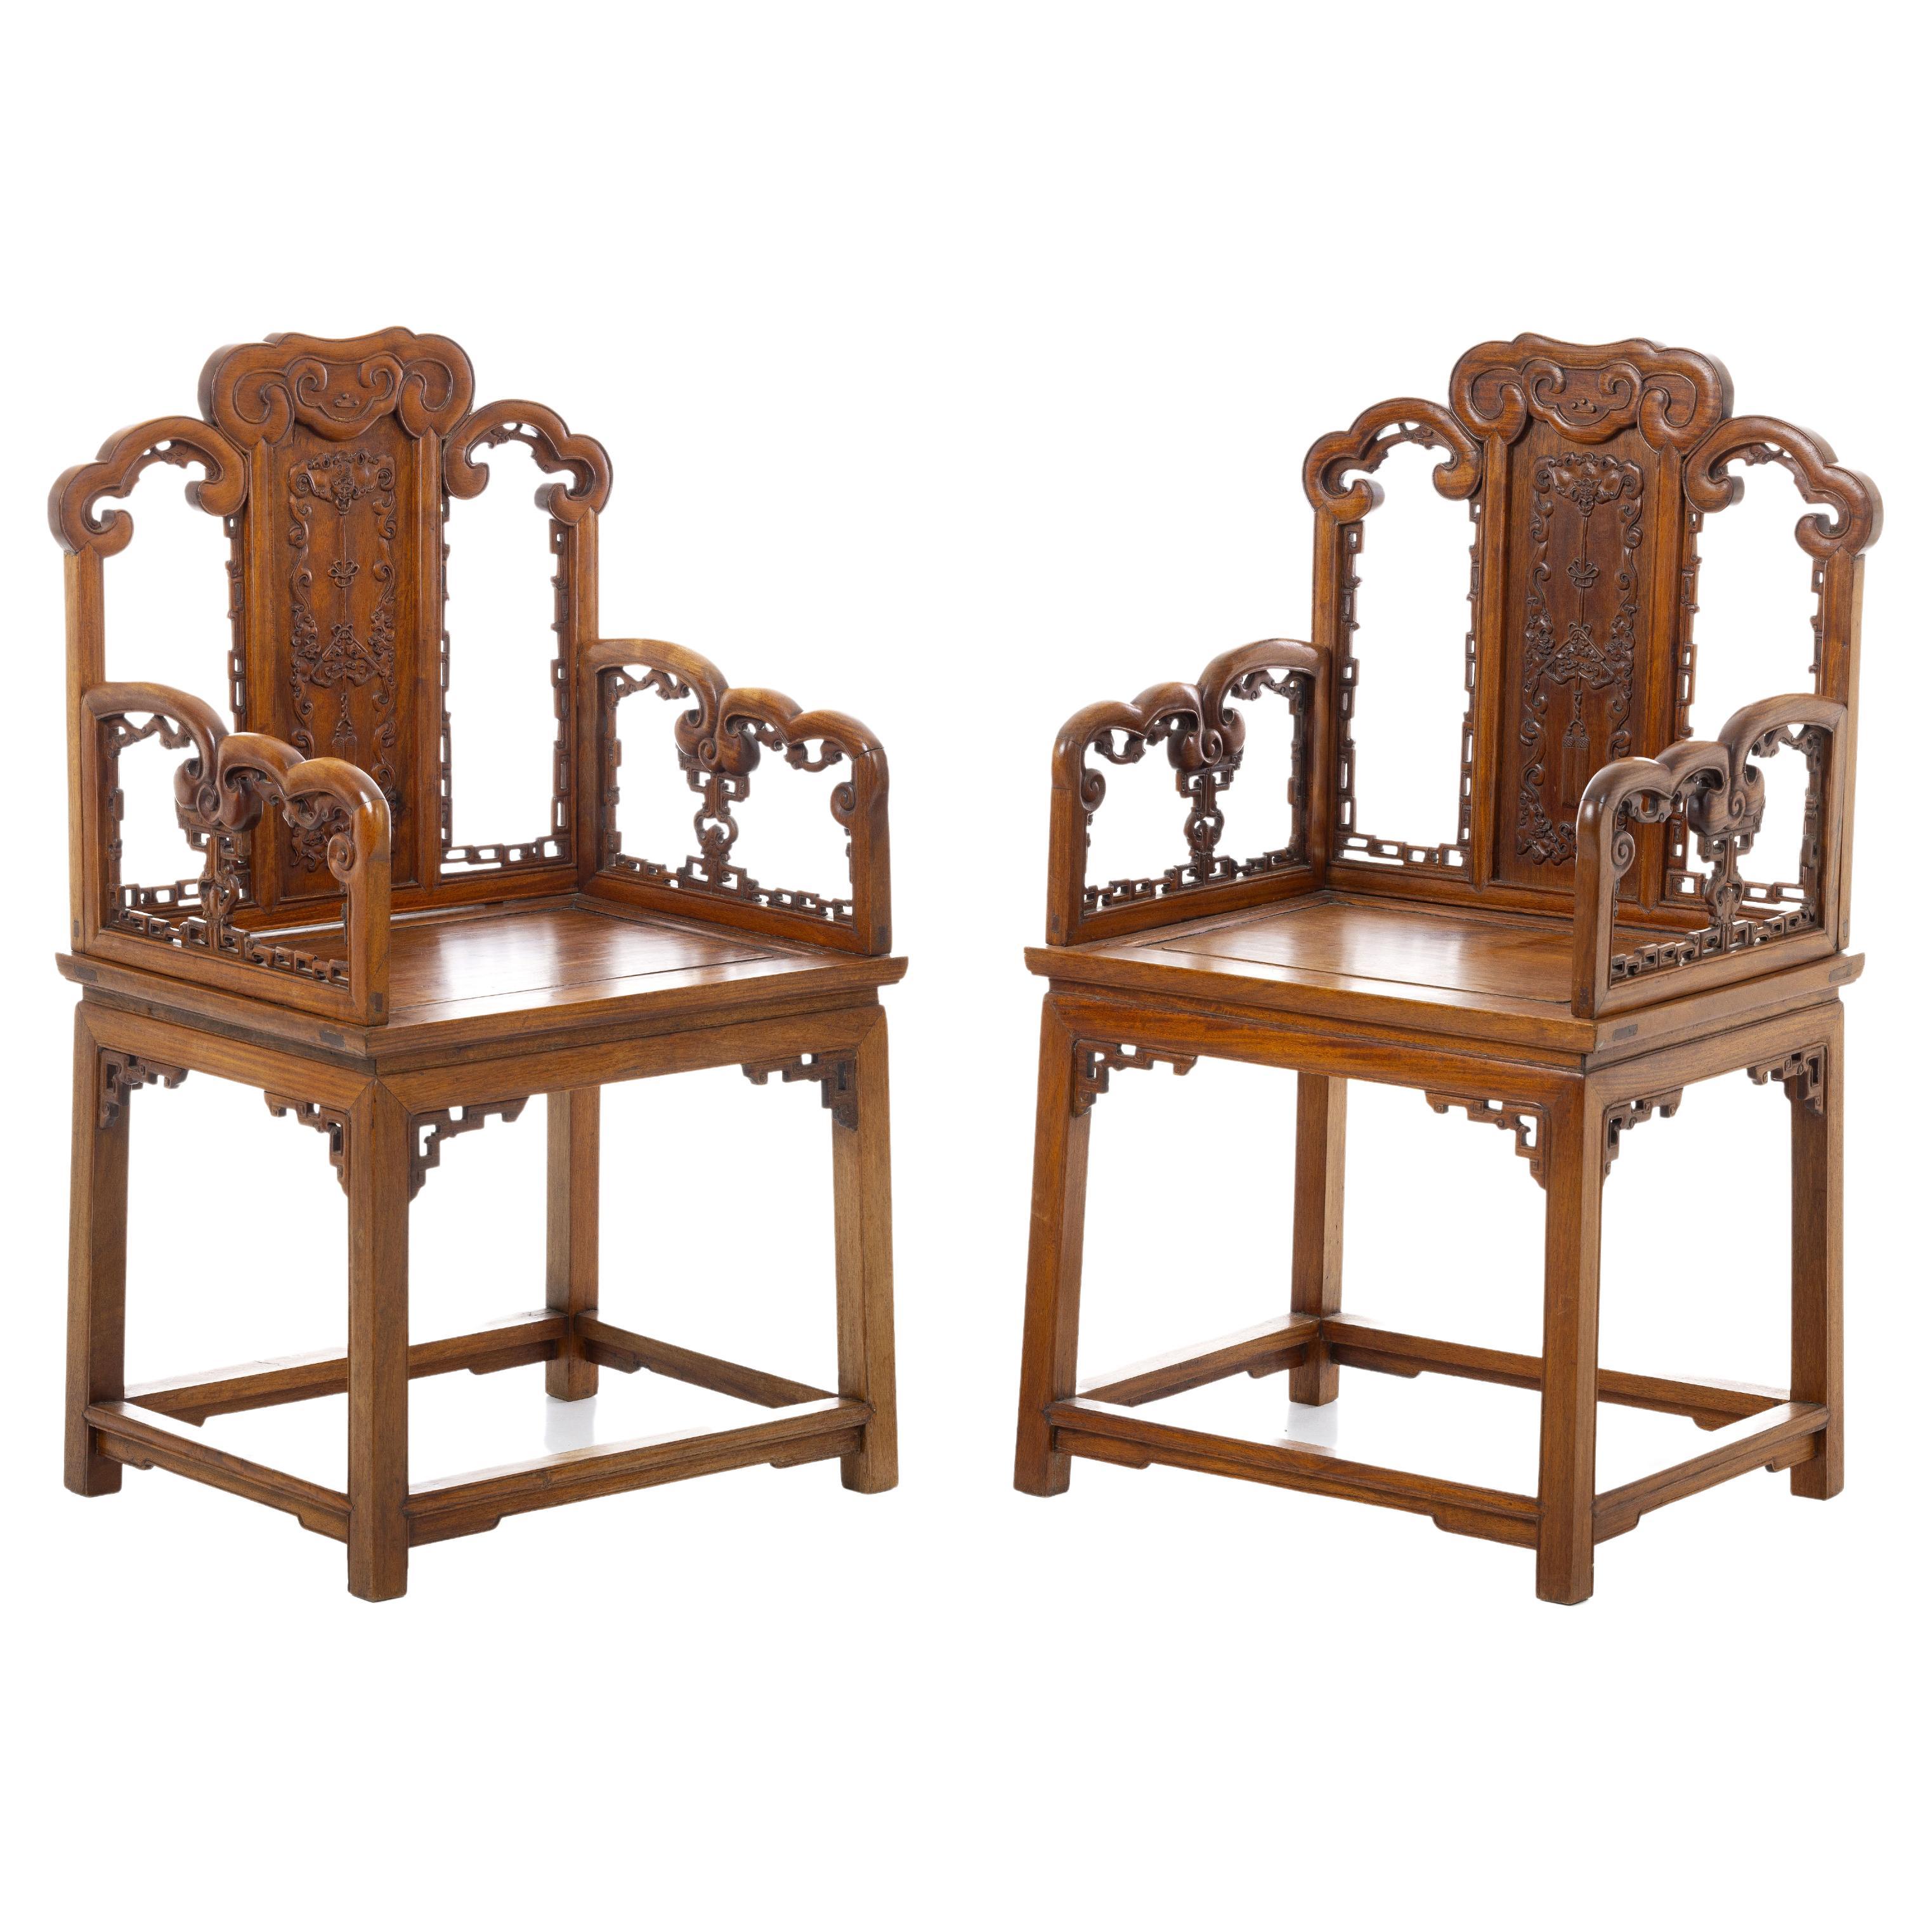 A Pair of Chinese Huanghuali Ruyi Chairs, Guangxu Period For Sale